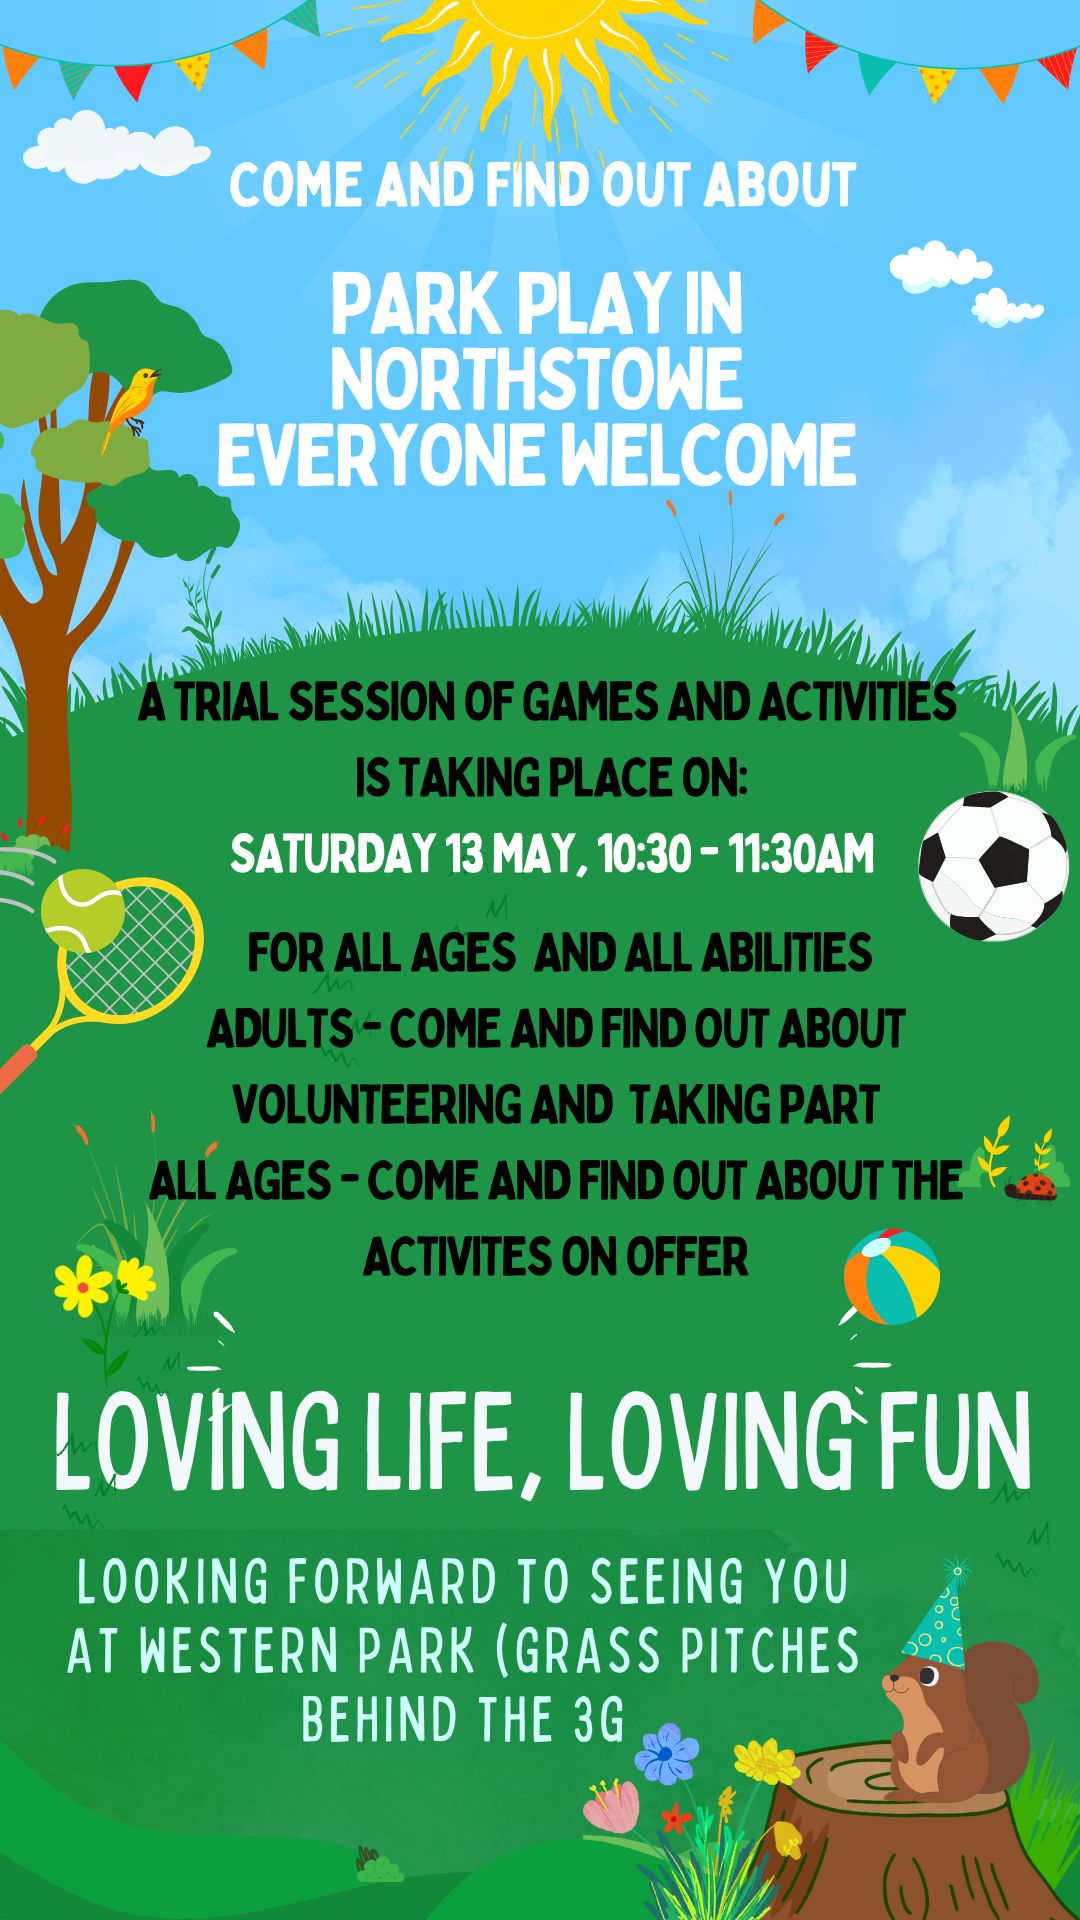 Park Play in Western Park on Sat. 13th May 10:30 - 11:30